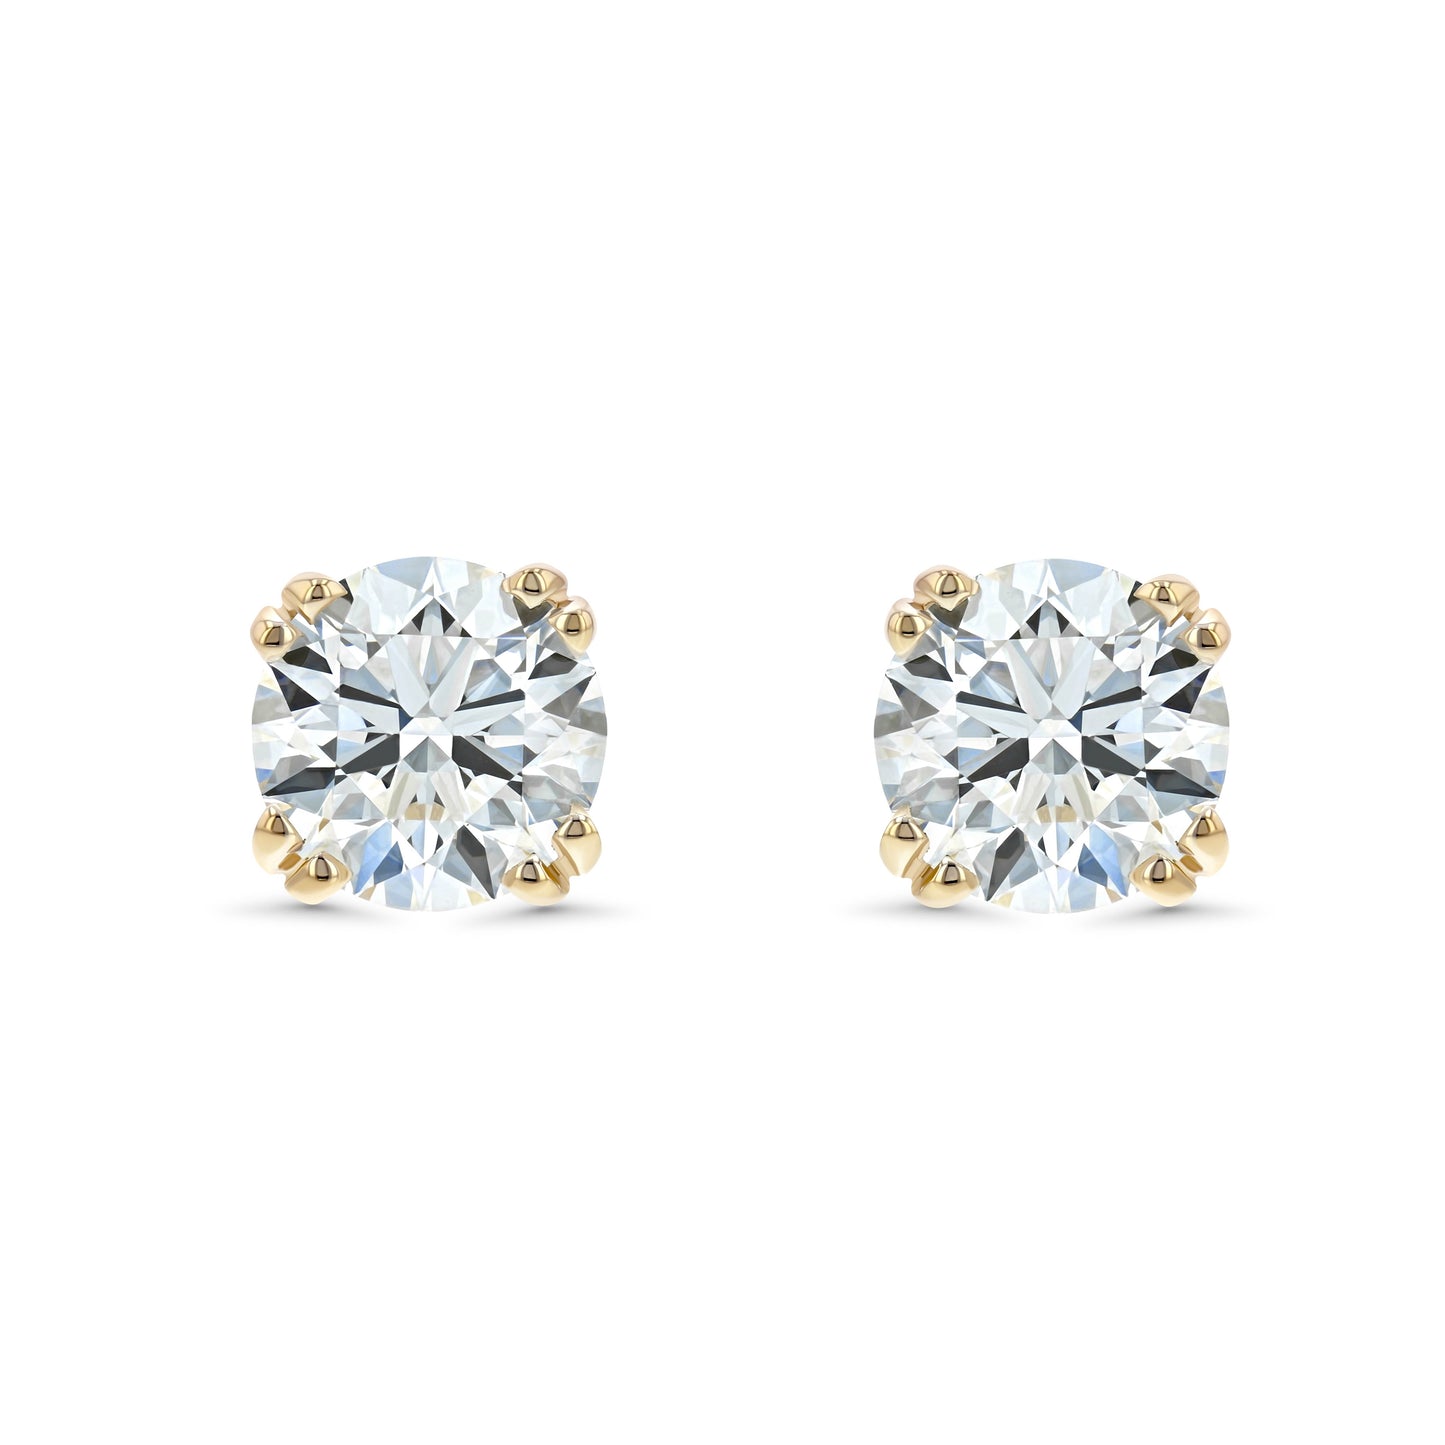 14k Yellow Gold Double Prong Round Diamond Stud Earrings 1ctw (5.2mm Ea), G Color, Si3 Clarity